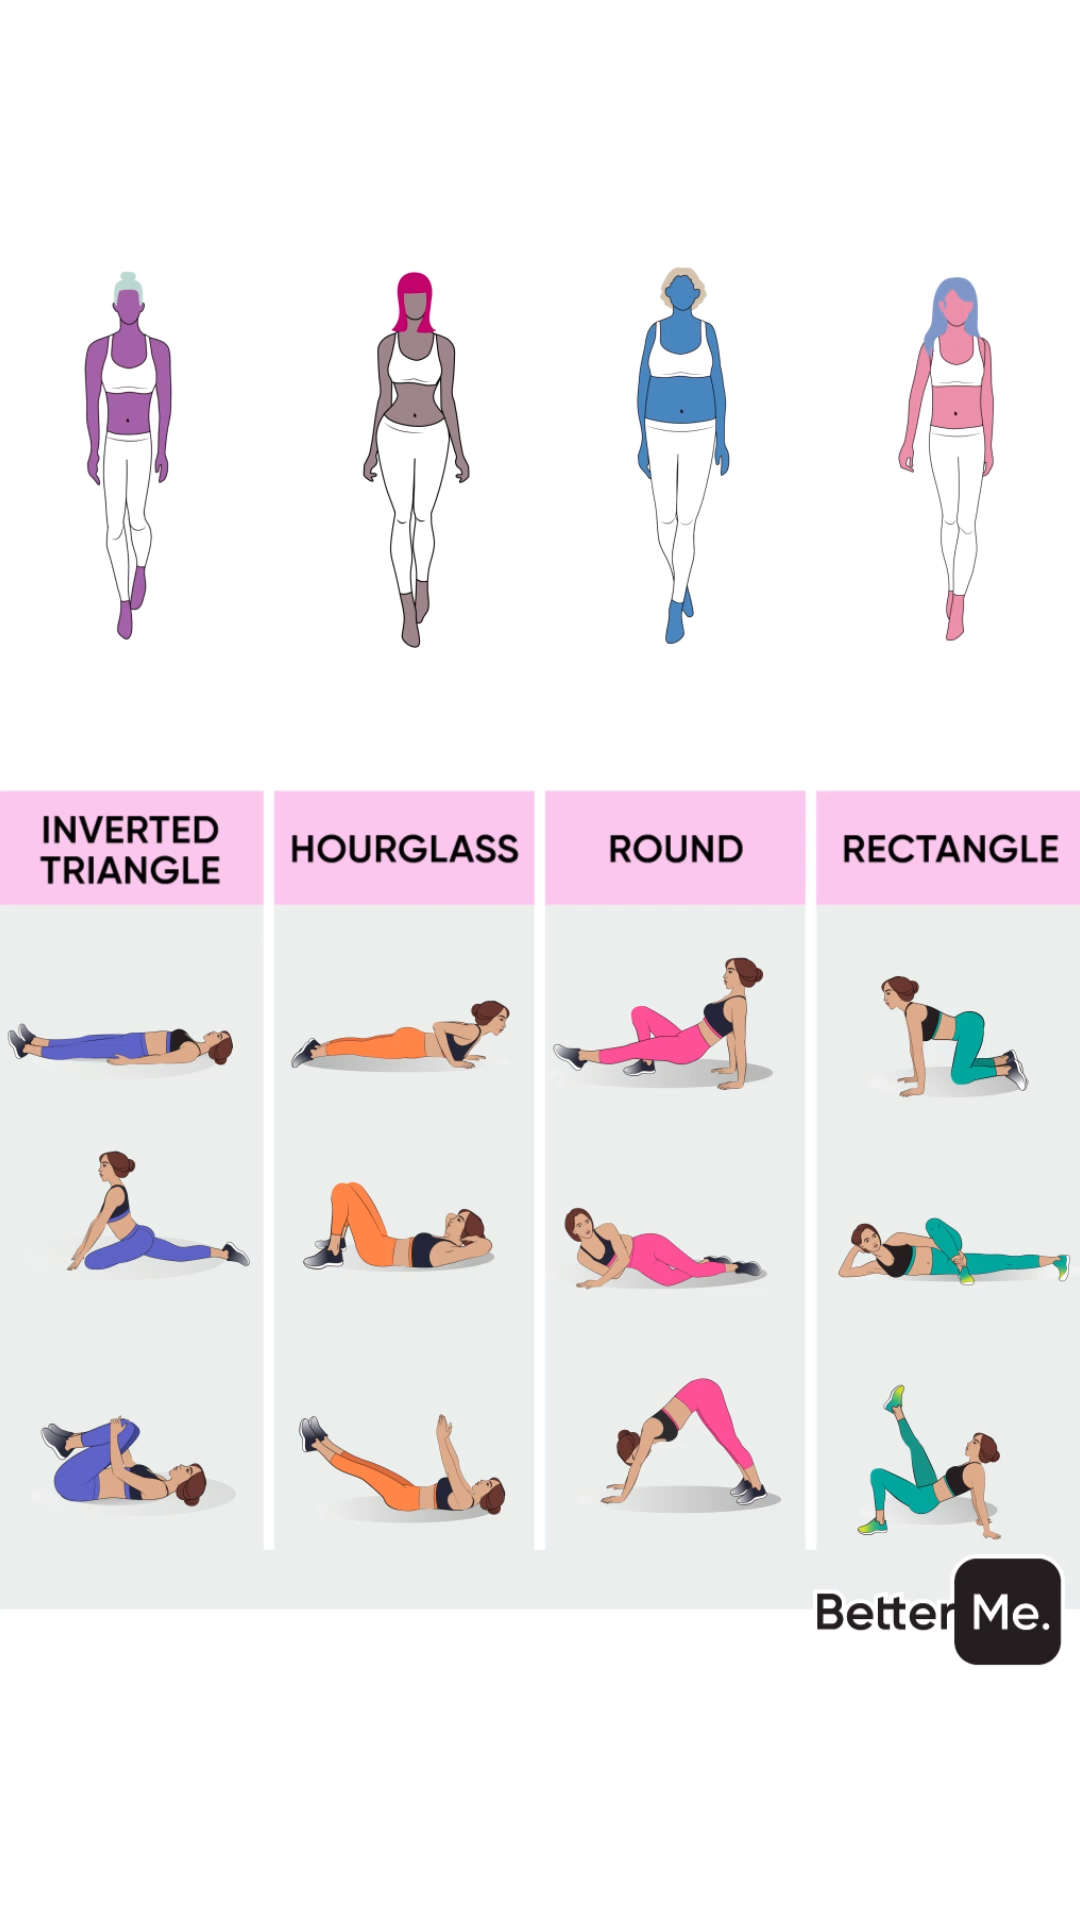 24. Personal workout -   14 fitness workout ideas